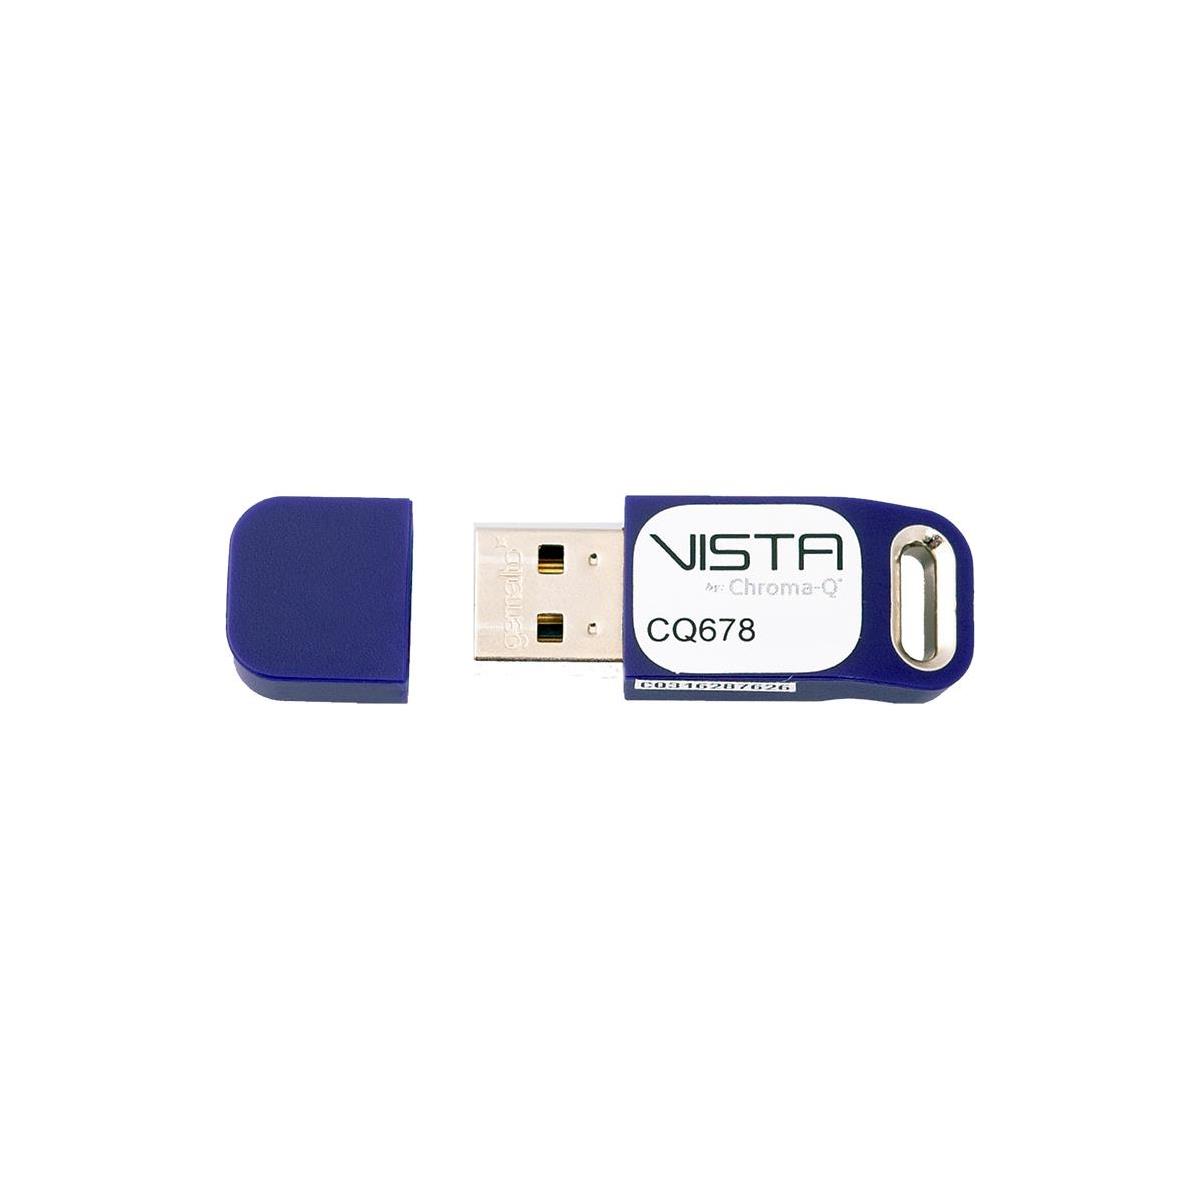 Image of Chroma-Q Vista 512-Channel Dongle